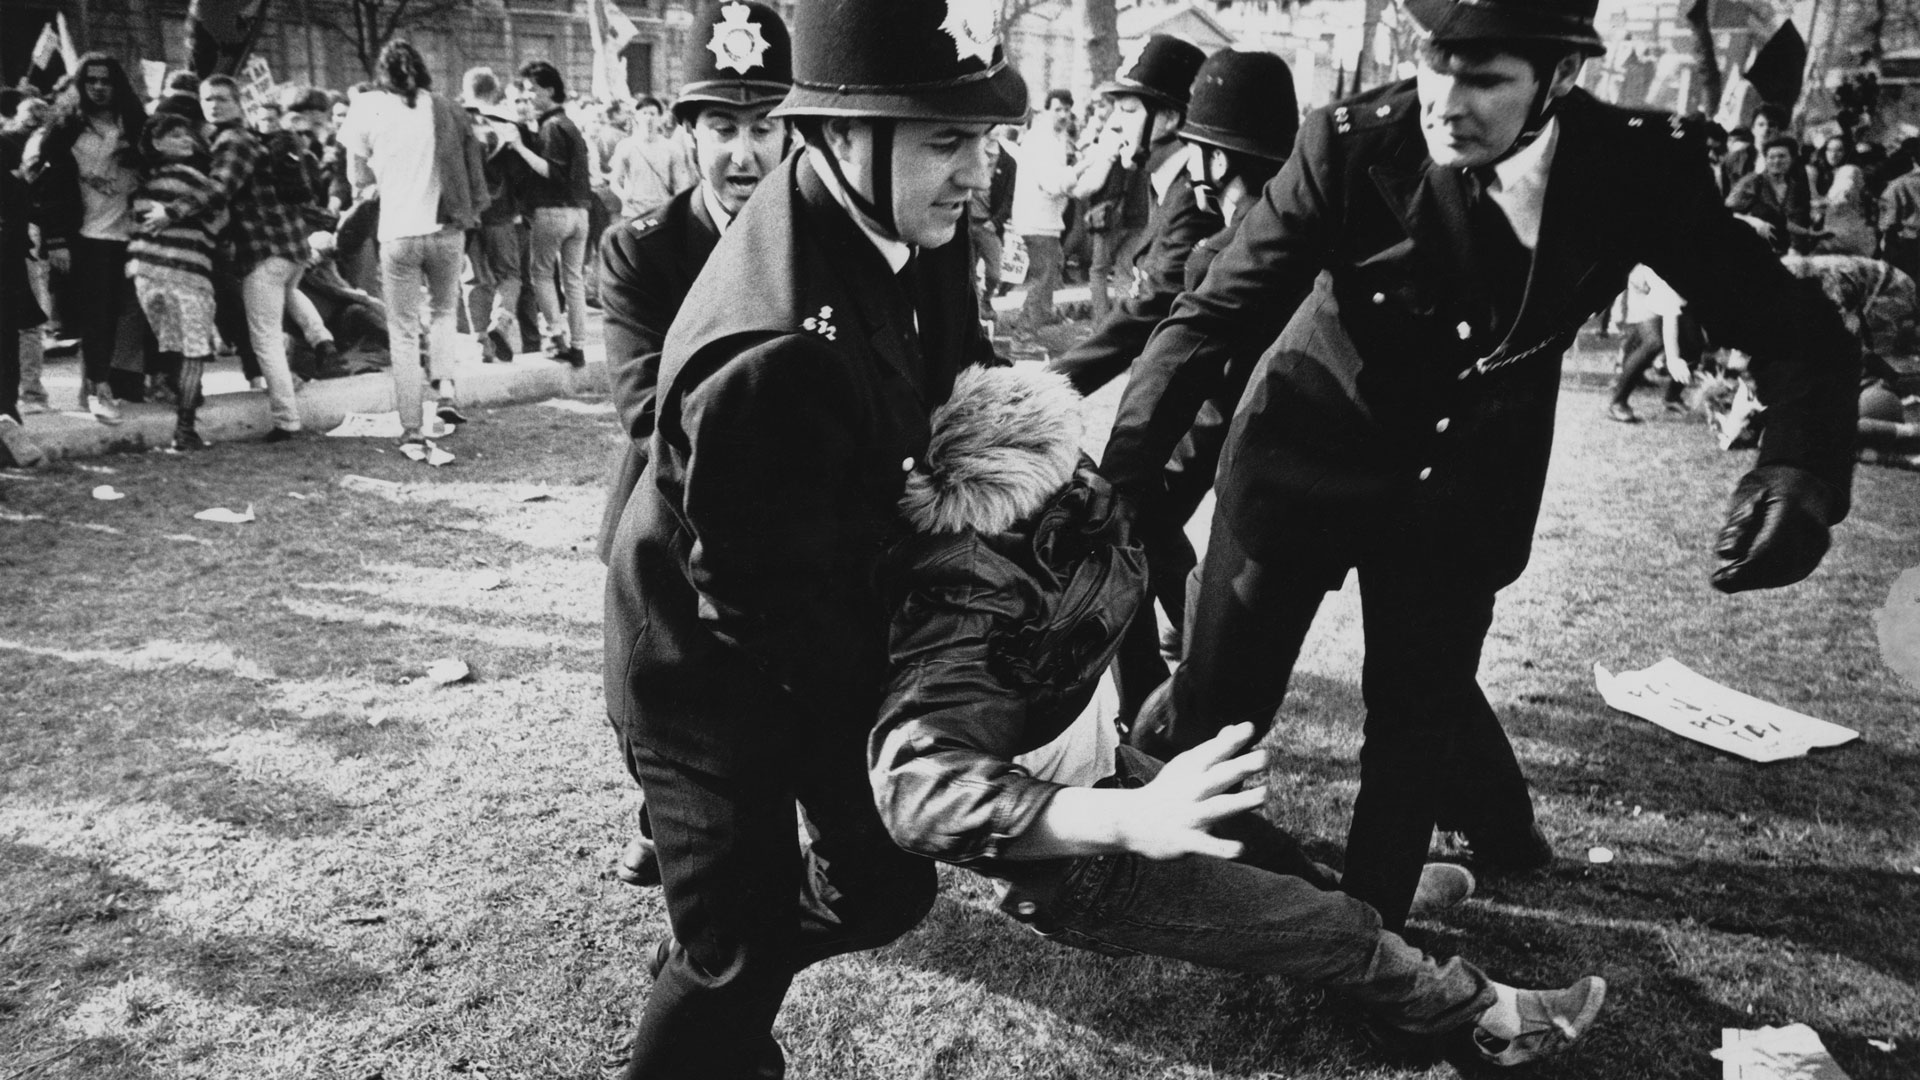 An arrest during the Poll Tax Riots / protest in London, 31 March 1990. Photo by: Peter Macdiarmid/Getty Images